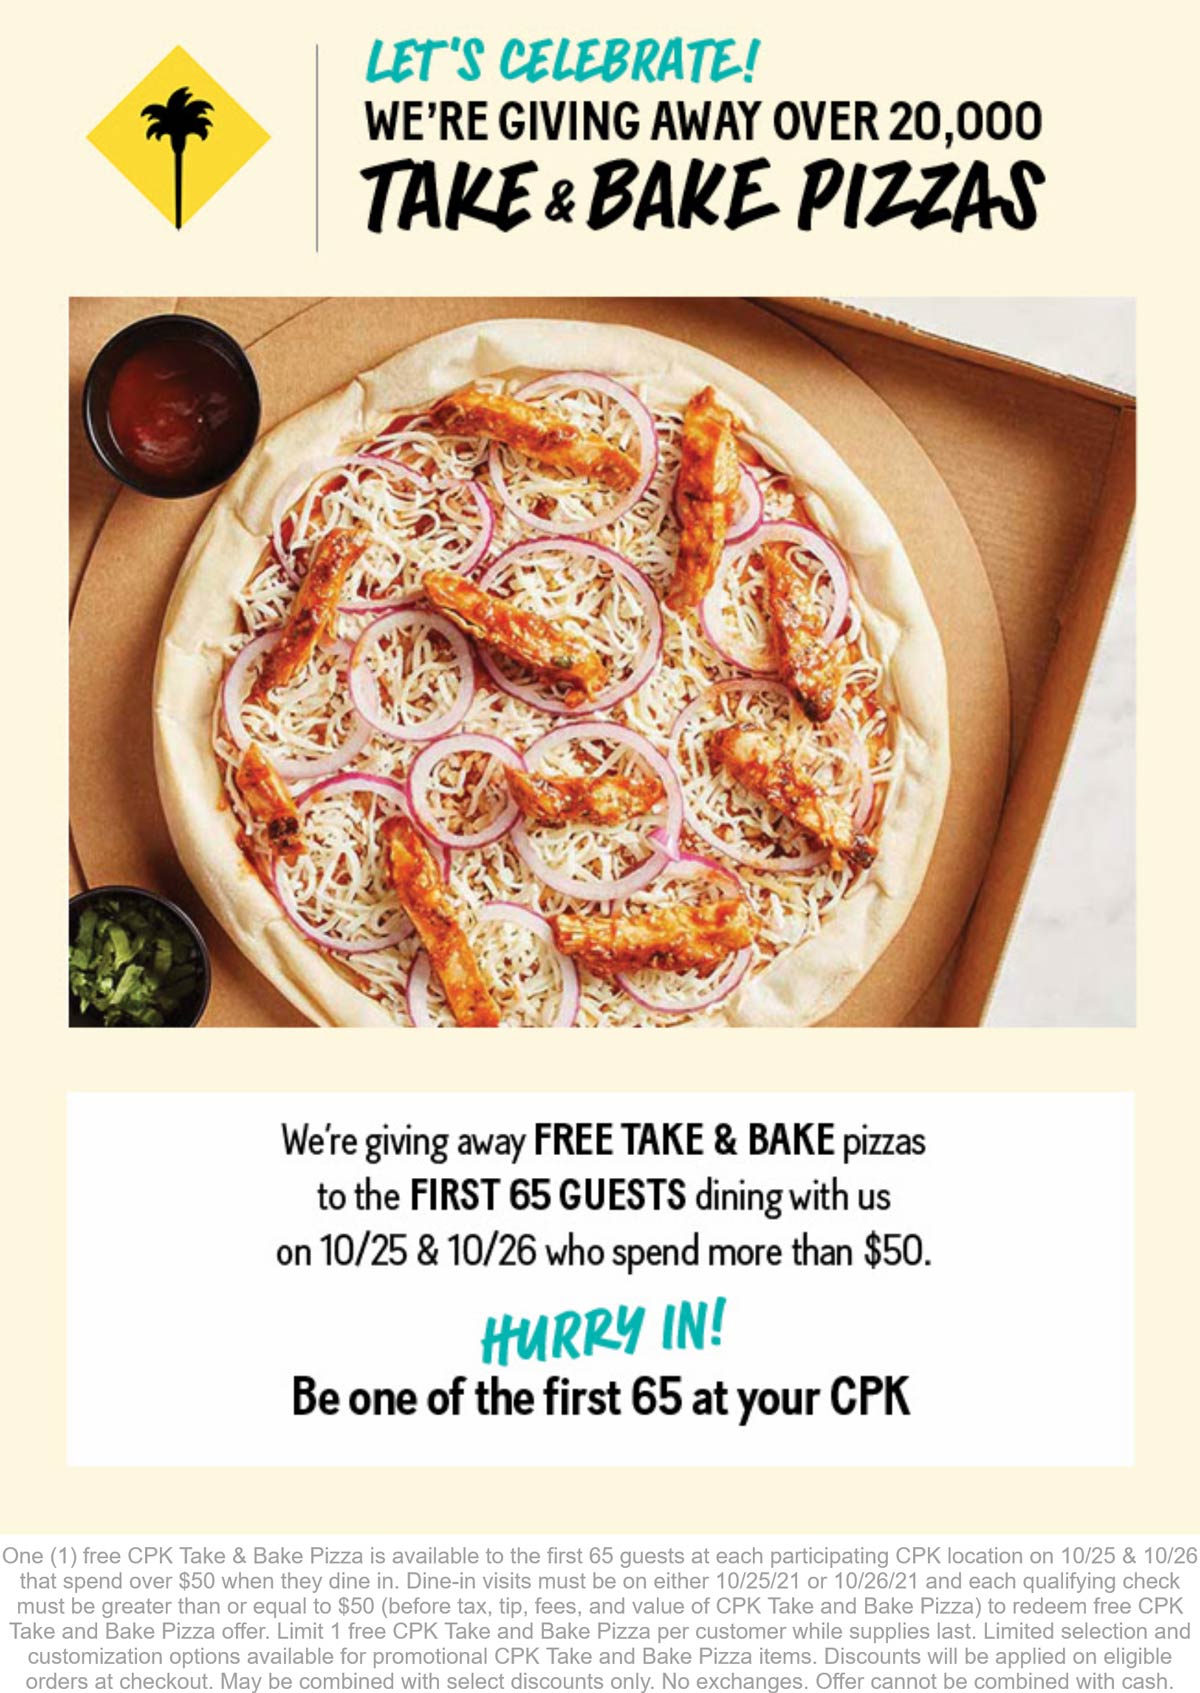 California Pizza Kitchen restaurants Coupon  First 65 spending $50 get a free pizza Mon & Tues at California Pizza Kitchen #californiapizzakitchen 